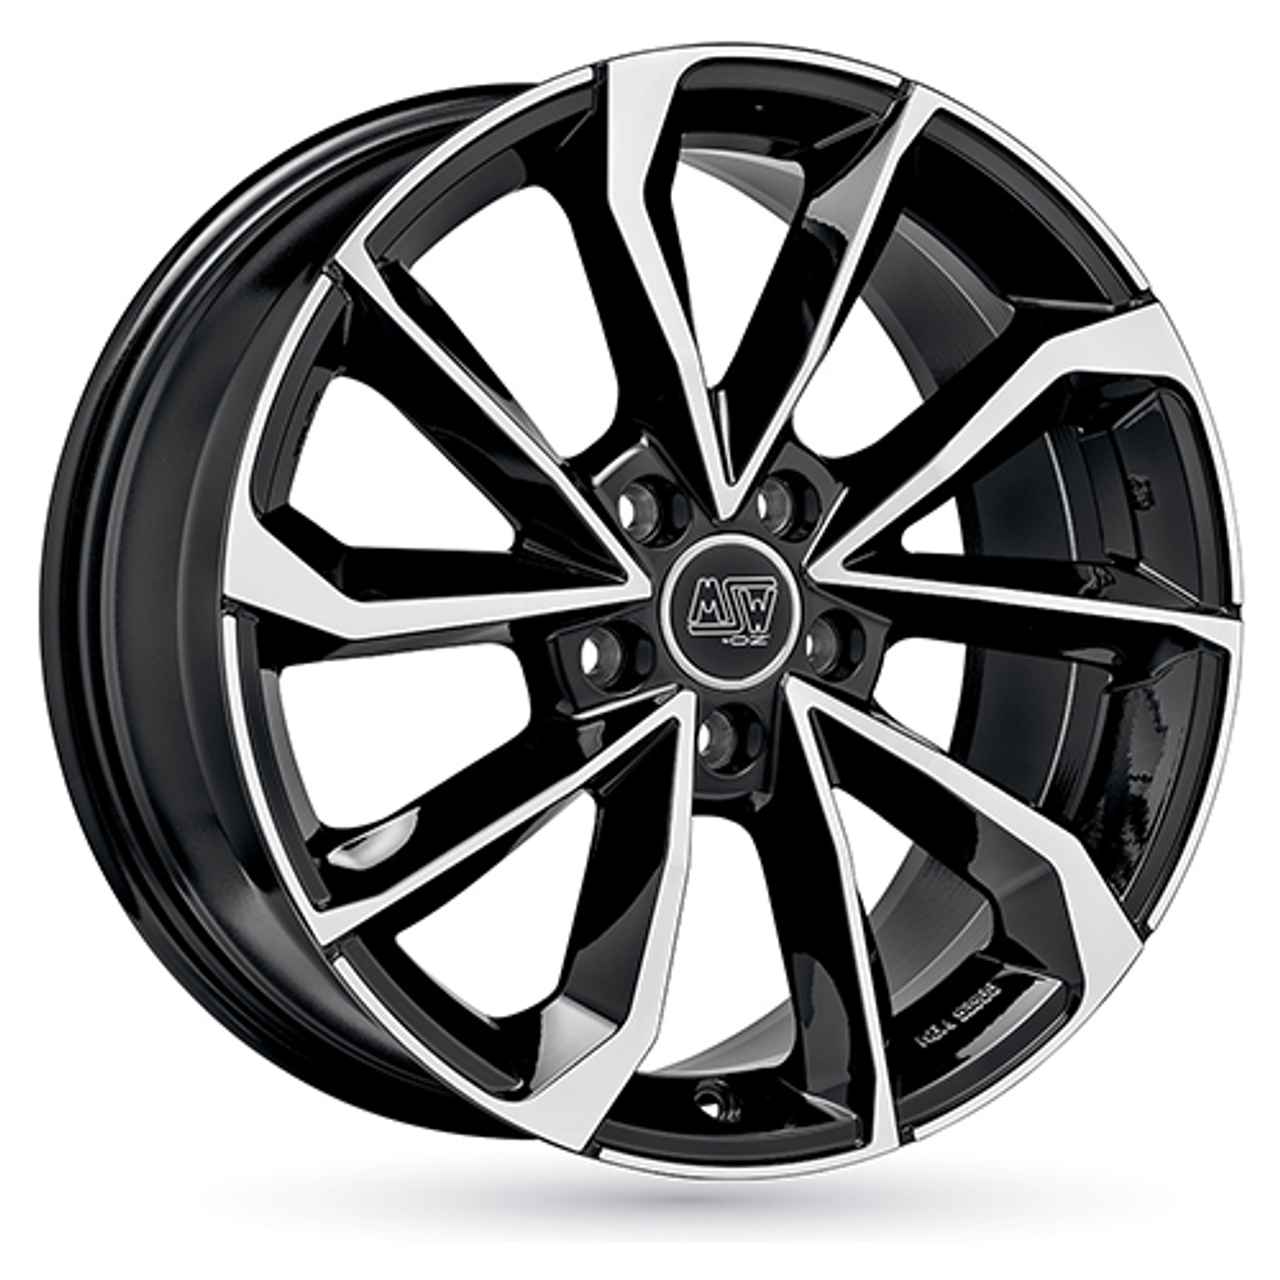 MSW (OZ) MSW 42 gloss black full polished 8.0Jx19 5x112 ET45